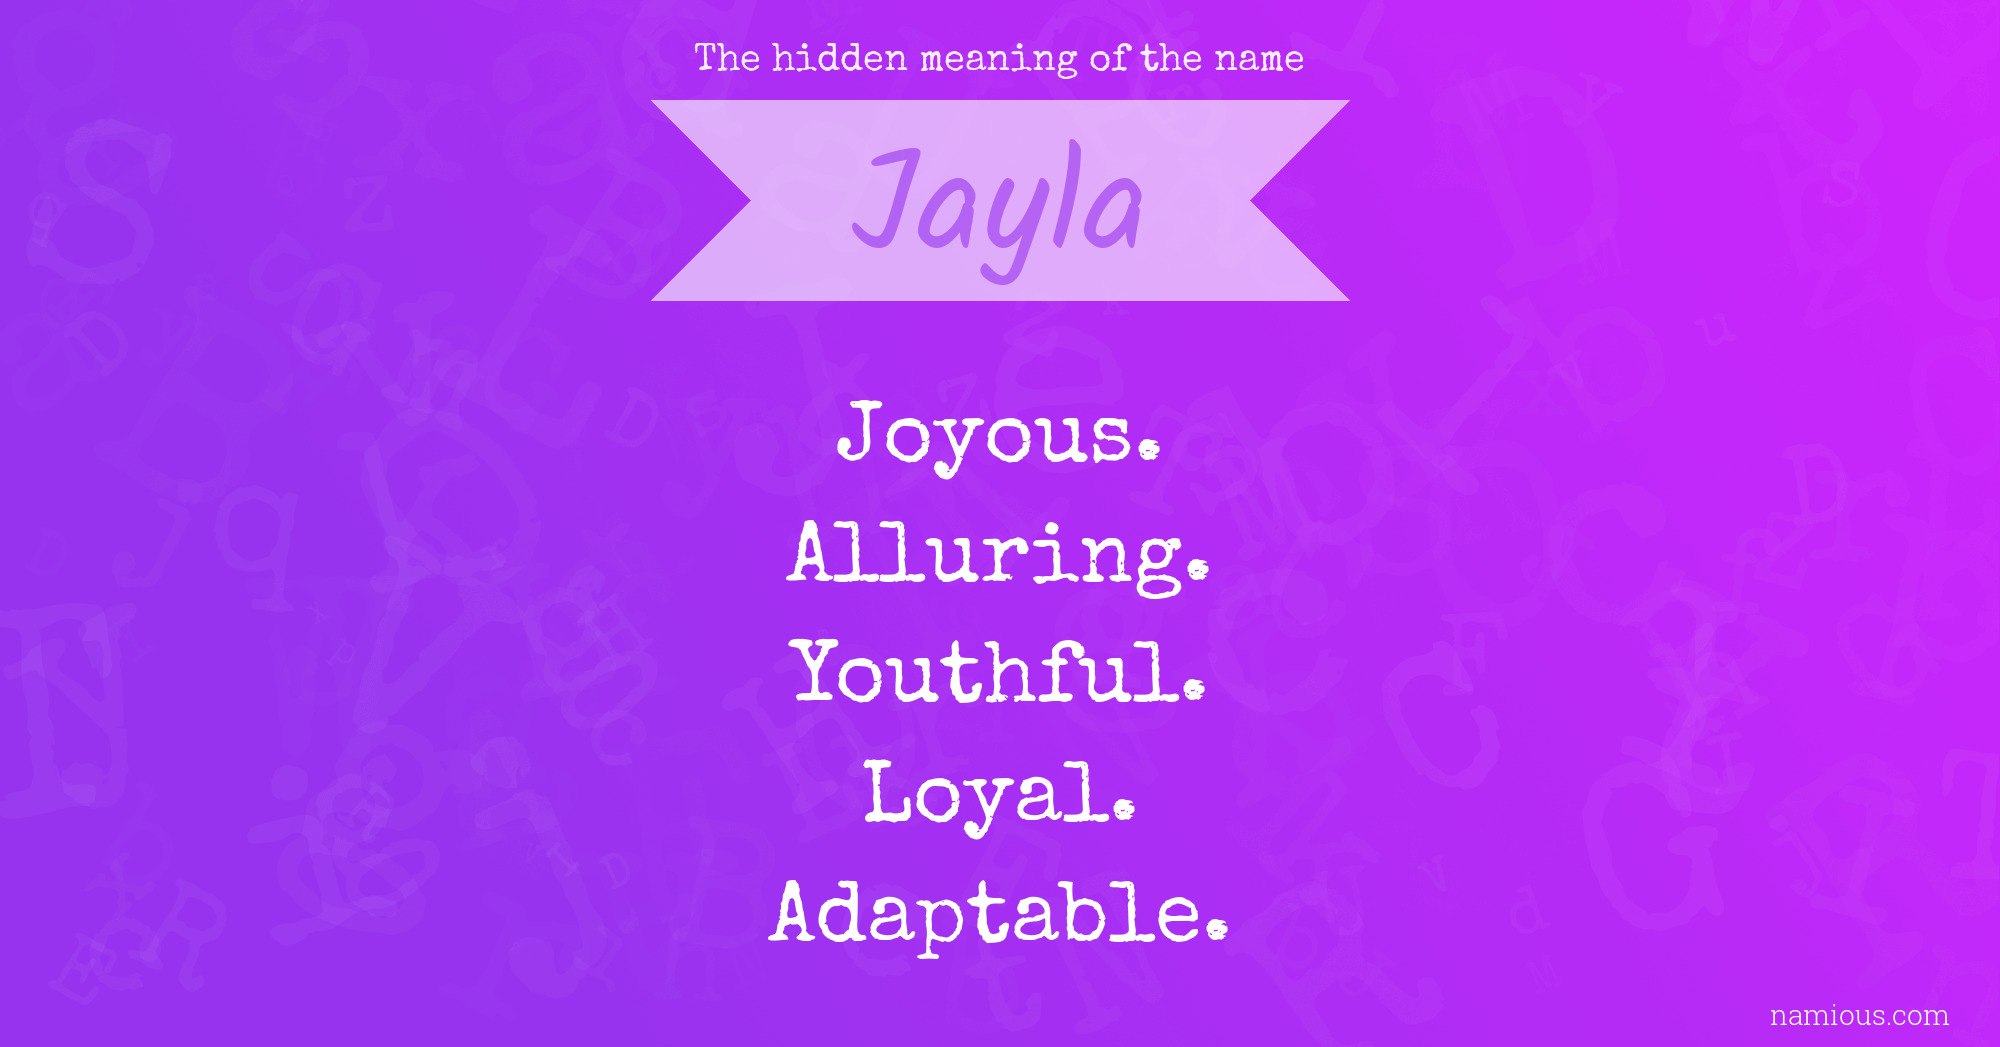 The hidden meaning of the name Jayla